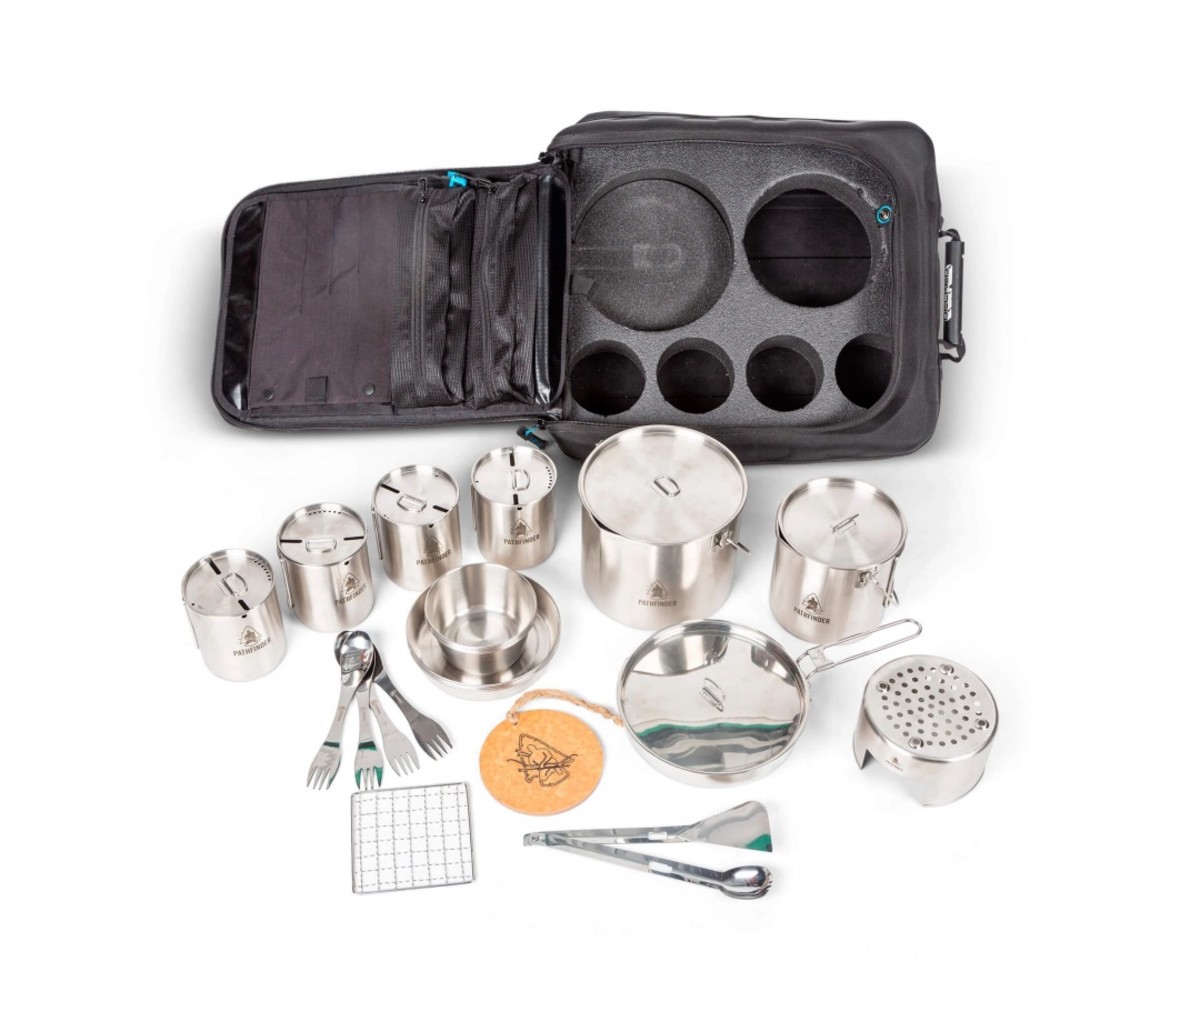 The Decked/Pathfinder cooking kit has all you need for creating culinary masterpieces outdoors.